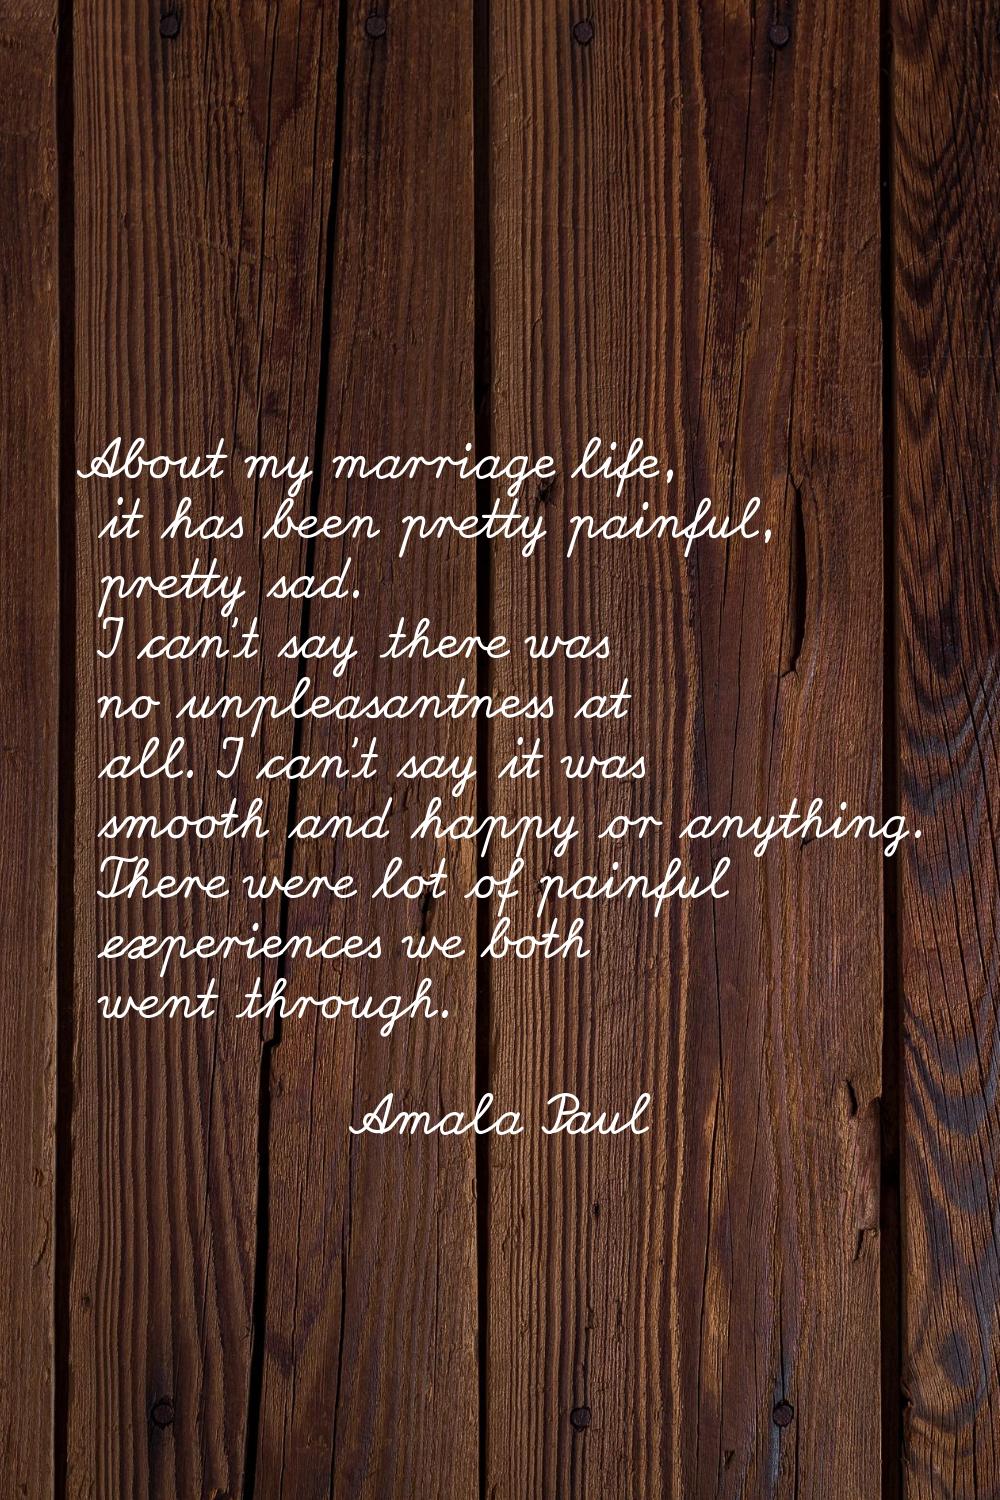 About my marriage life, it has been pretty painful, pretty sad. I can't say there was no unpleasant